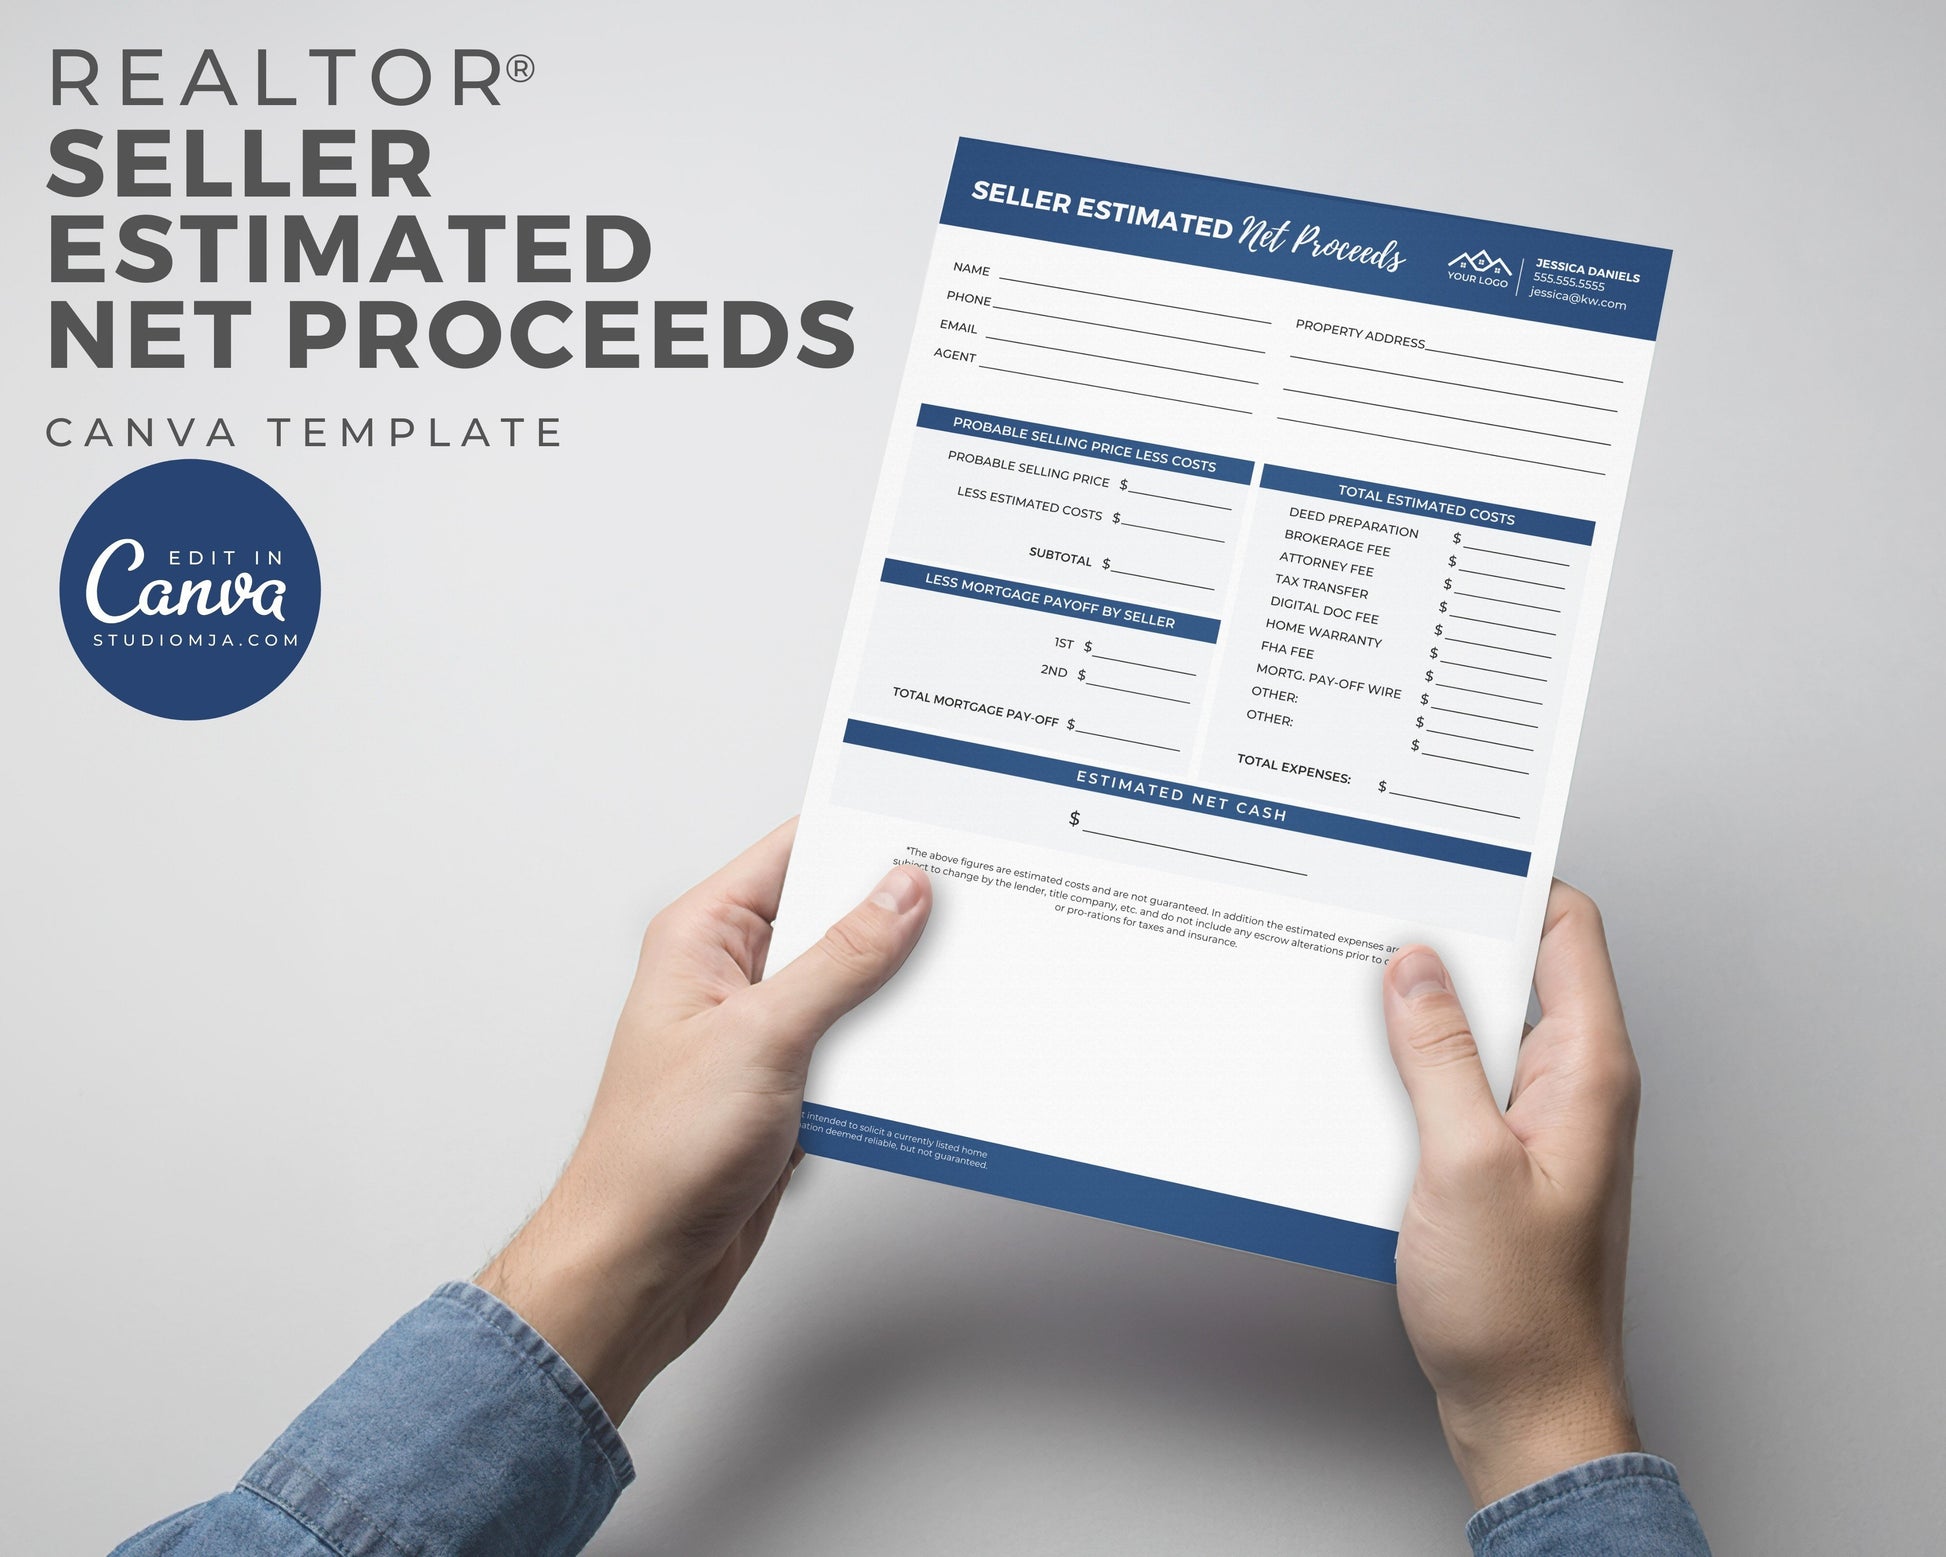 estimated net proceeds canva template for real estate agents.  A mockup featuring a blue and white form with black text and gray colored boxes.   Probable selling price less costs, total estimated costs, less mortgage payoff by seller, estimated net cash.  Hands holding flyer with blue sleeves.